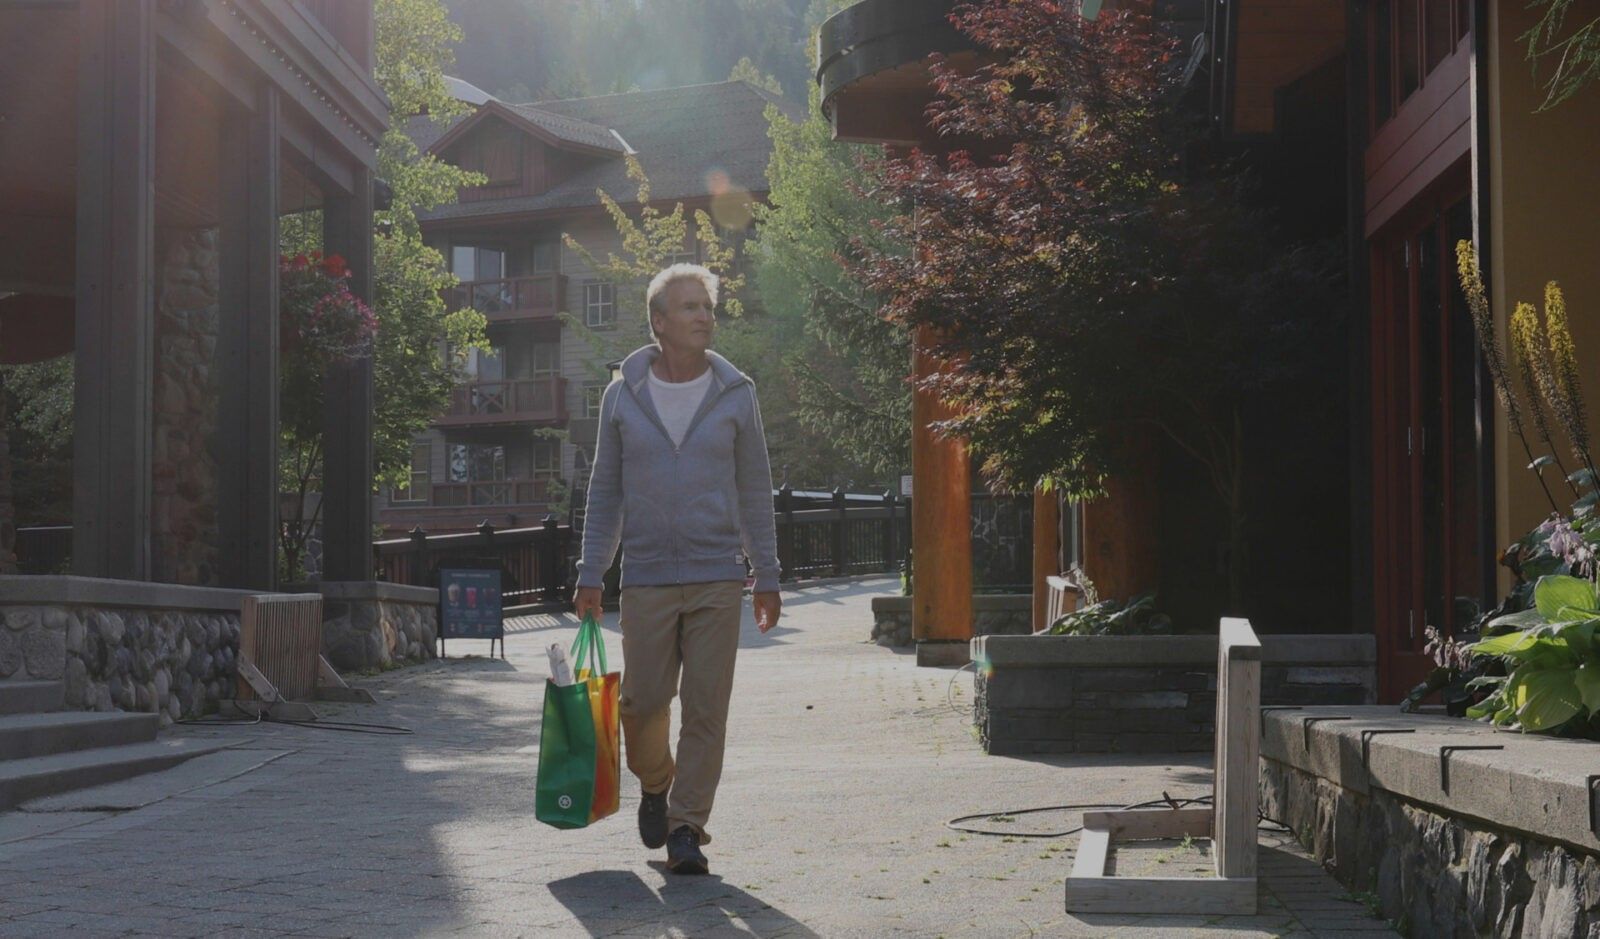 A person walking through a sunlit street with shops and buildings on a clear day, carrying a green reusable bag for their sustainable caregiving supplies.